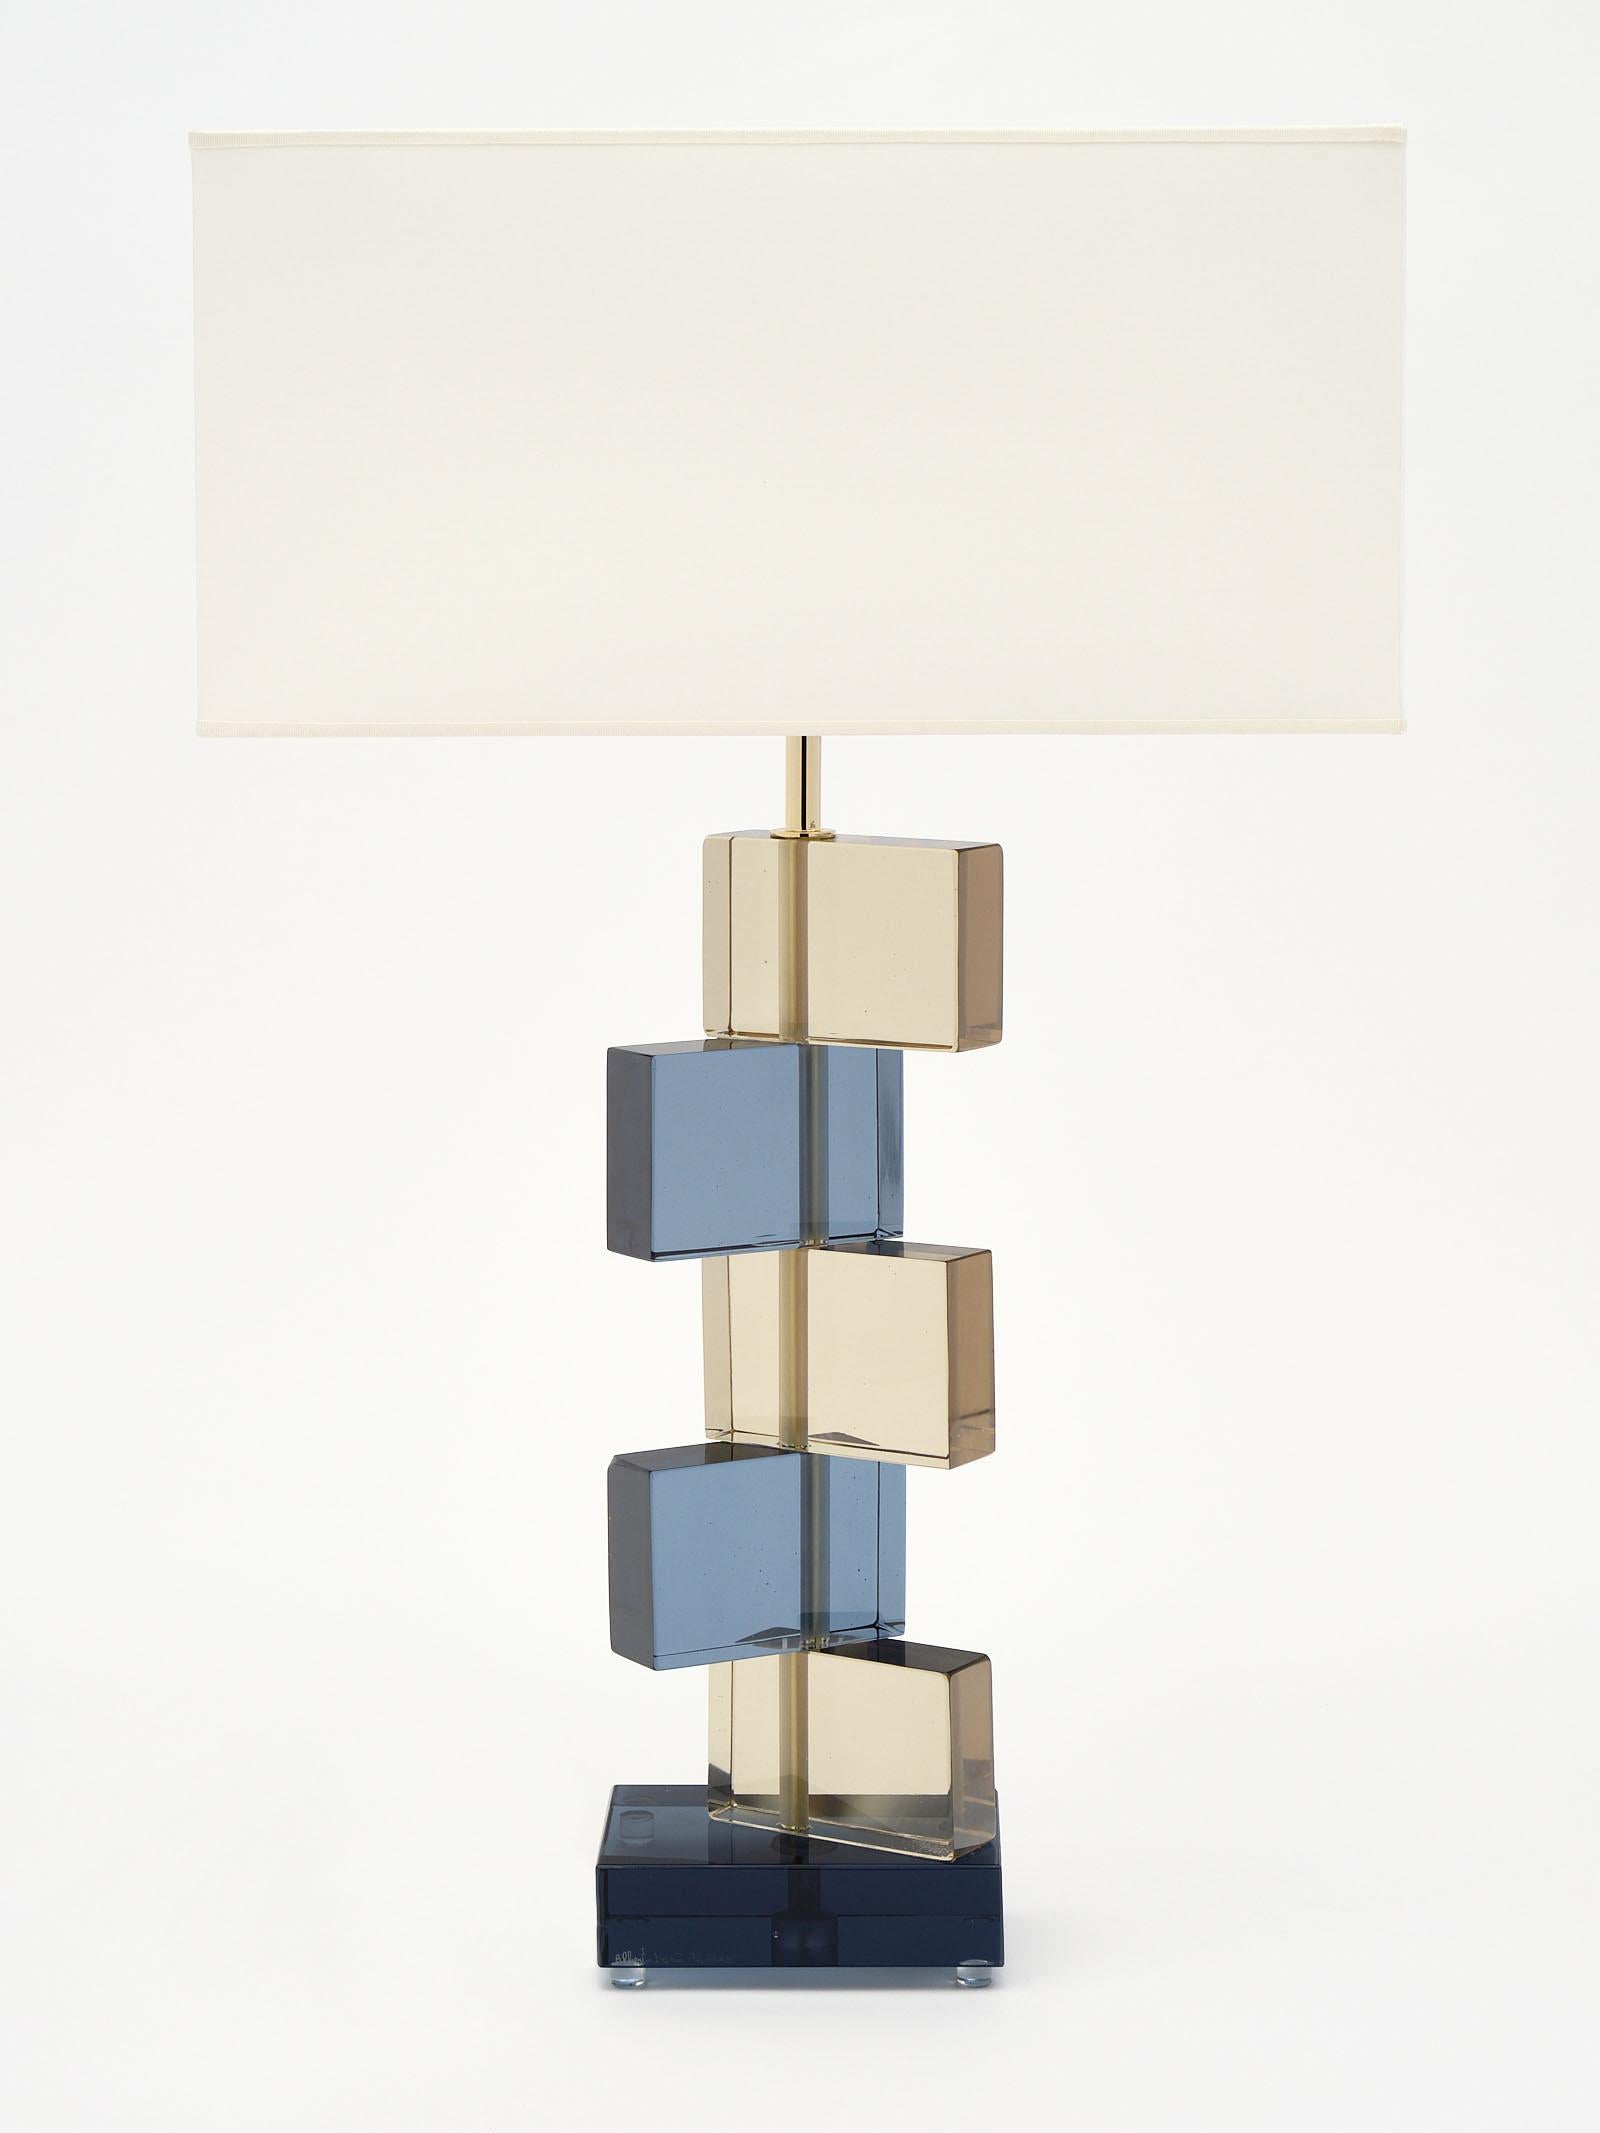 Amber and blue Murano glass geometric lamps signed by maestro Alberto Dona. We love the stacked block effect of the hand blown glass elements. They have been newly wired to fit US standards.

This pair is currently located at our dealer's warehouse